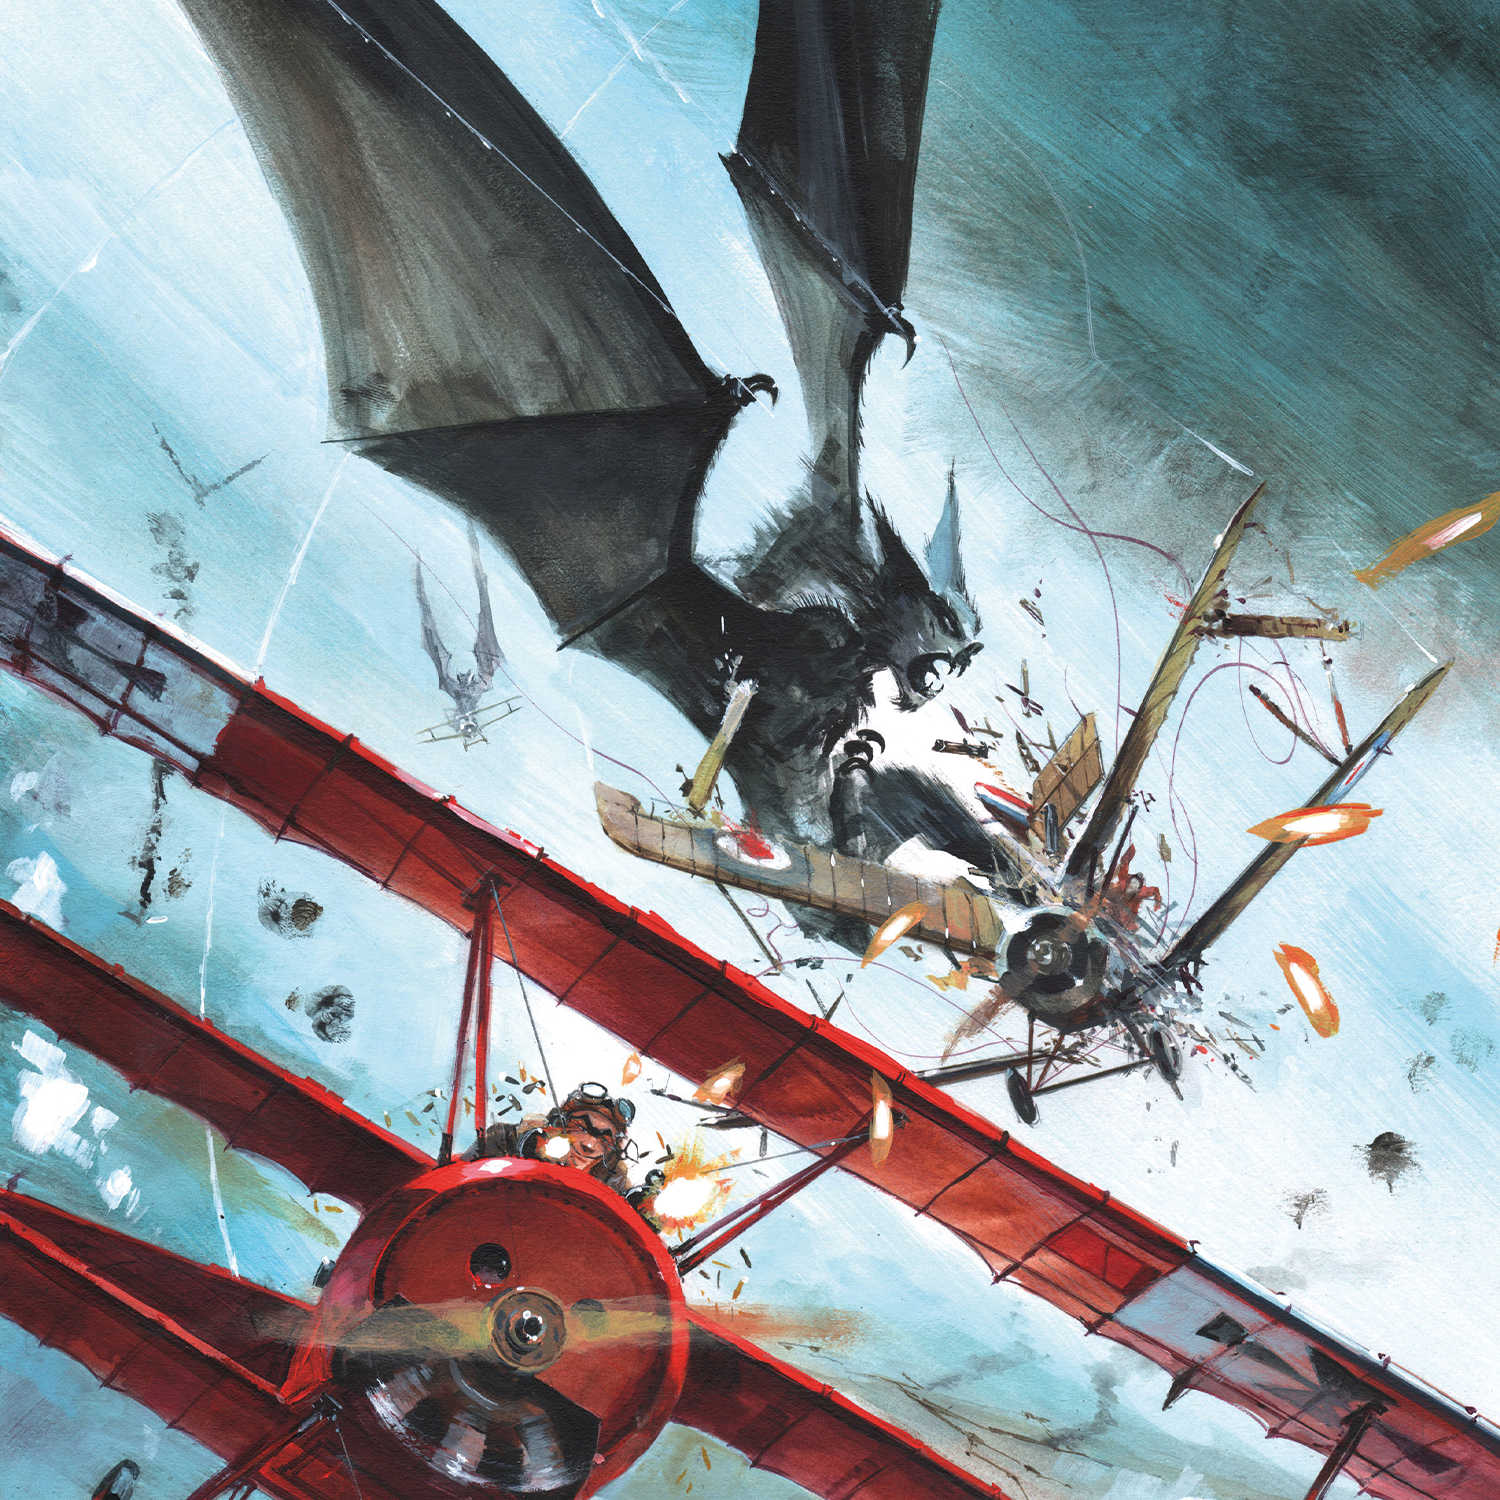 Giant bats and dogfights – pre-order Black Max Vol.3